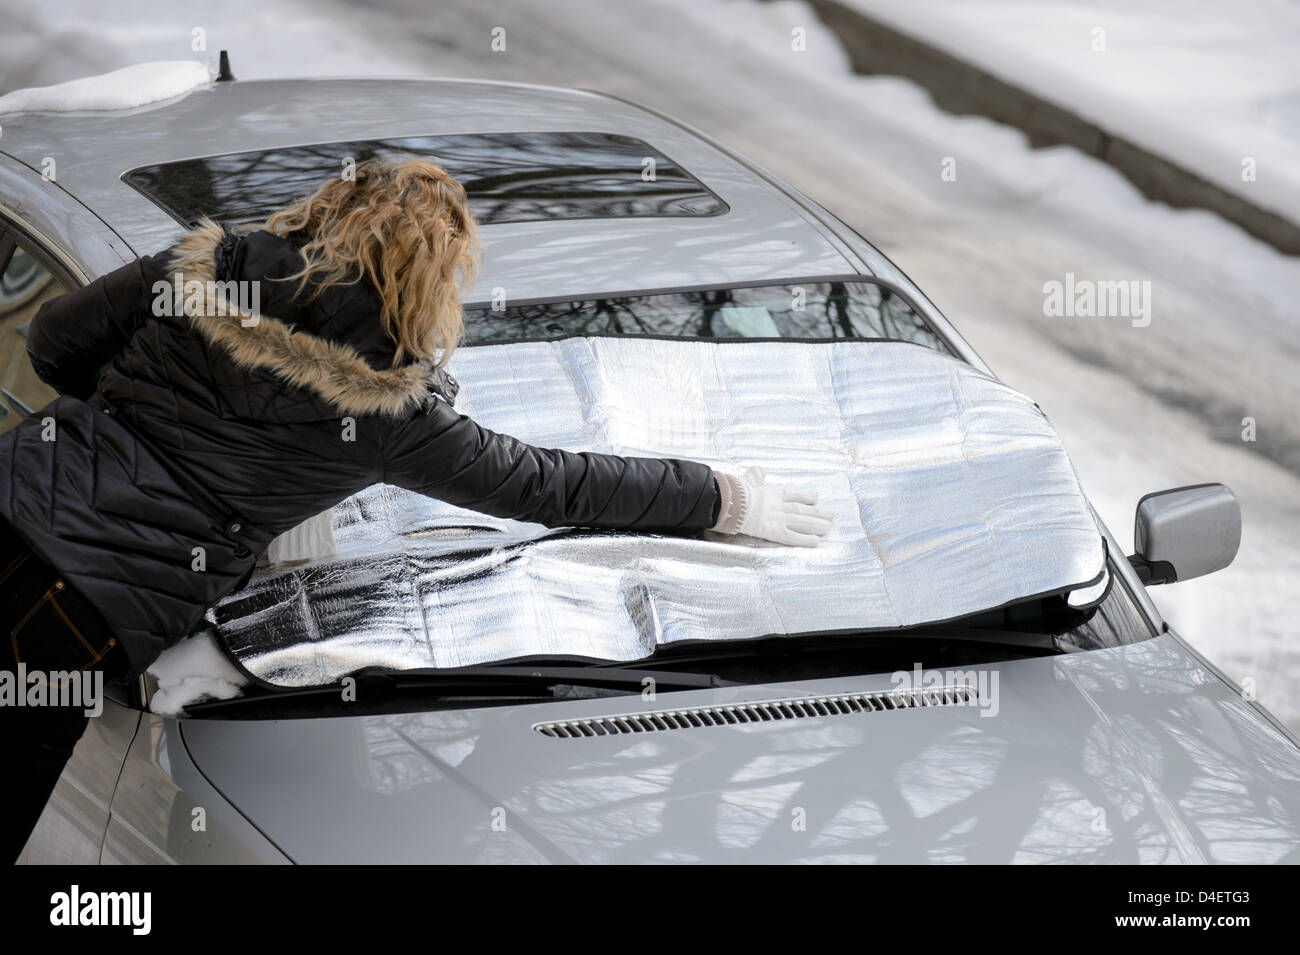 A woman places a antifreeze tarpaulin onto the windshield of a car